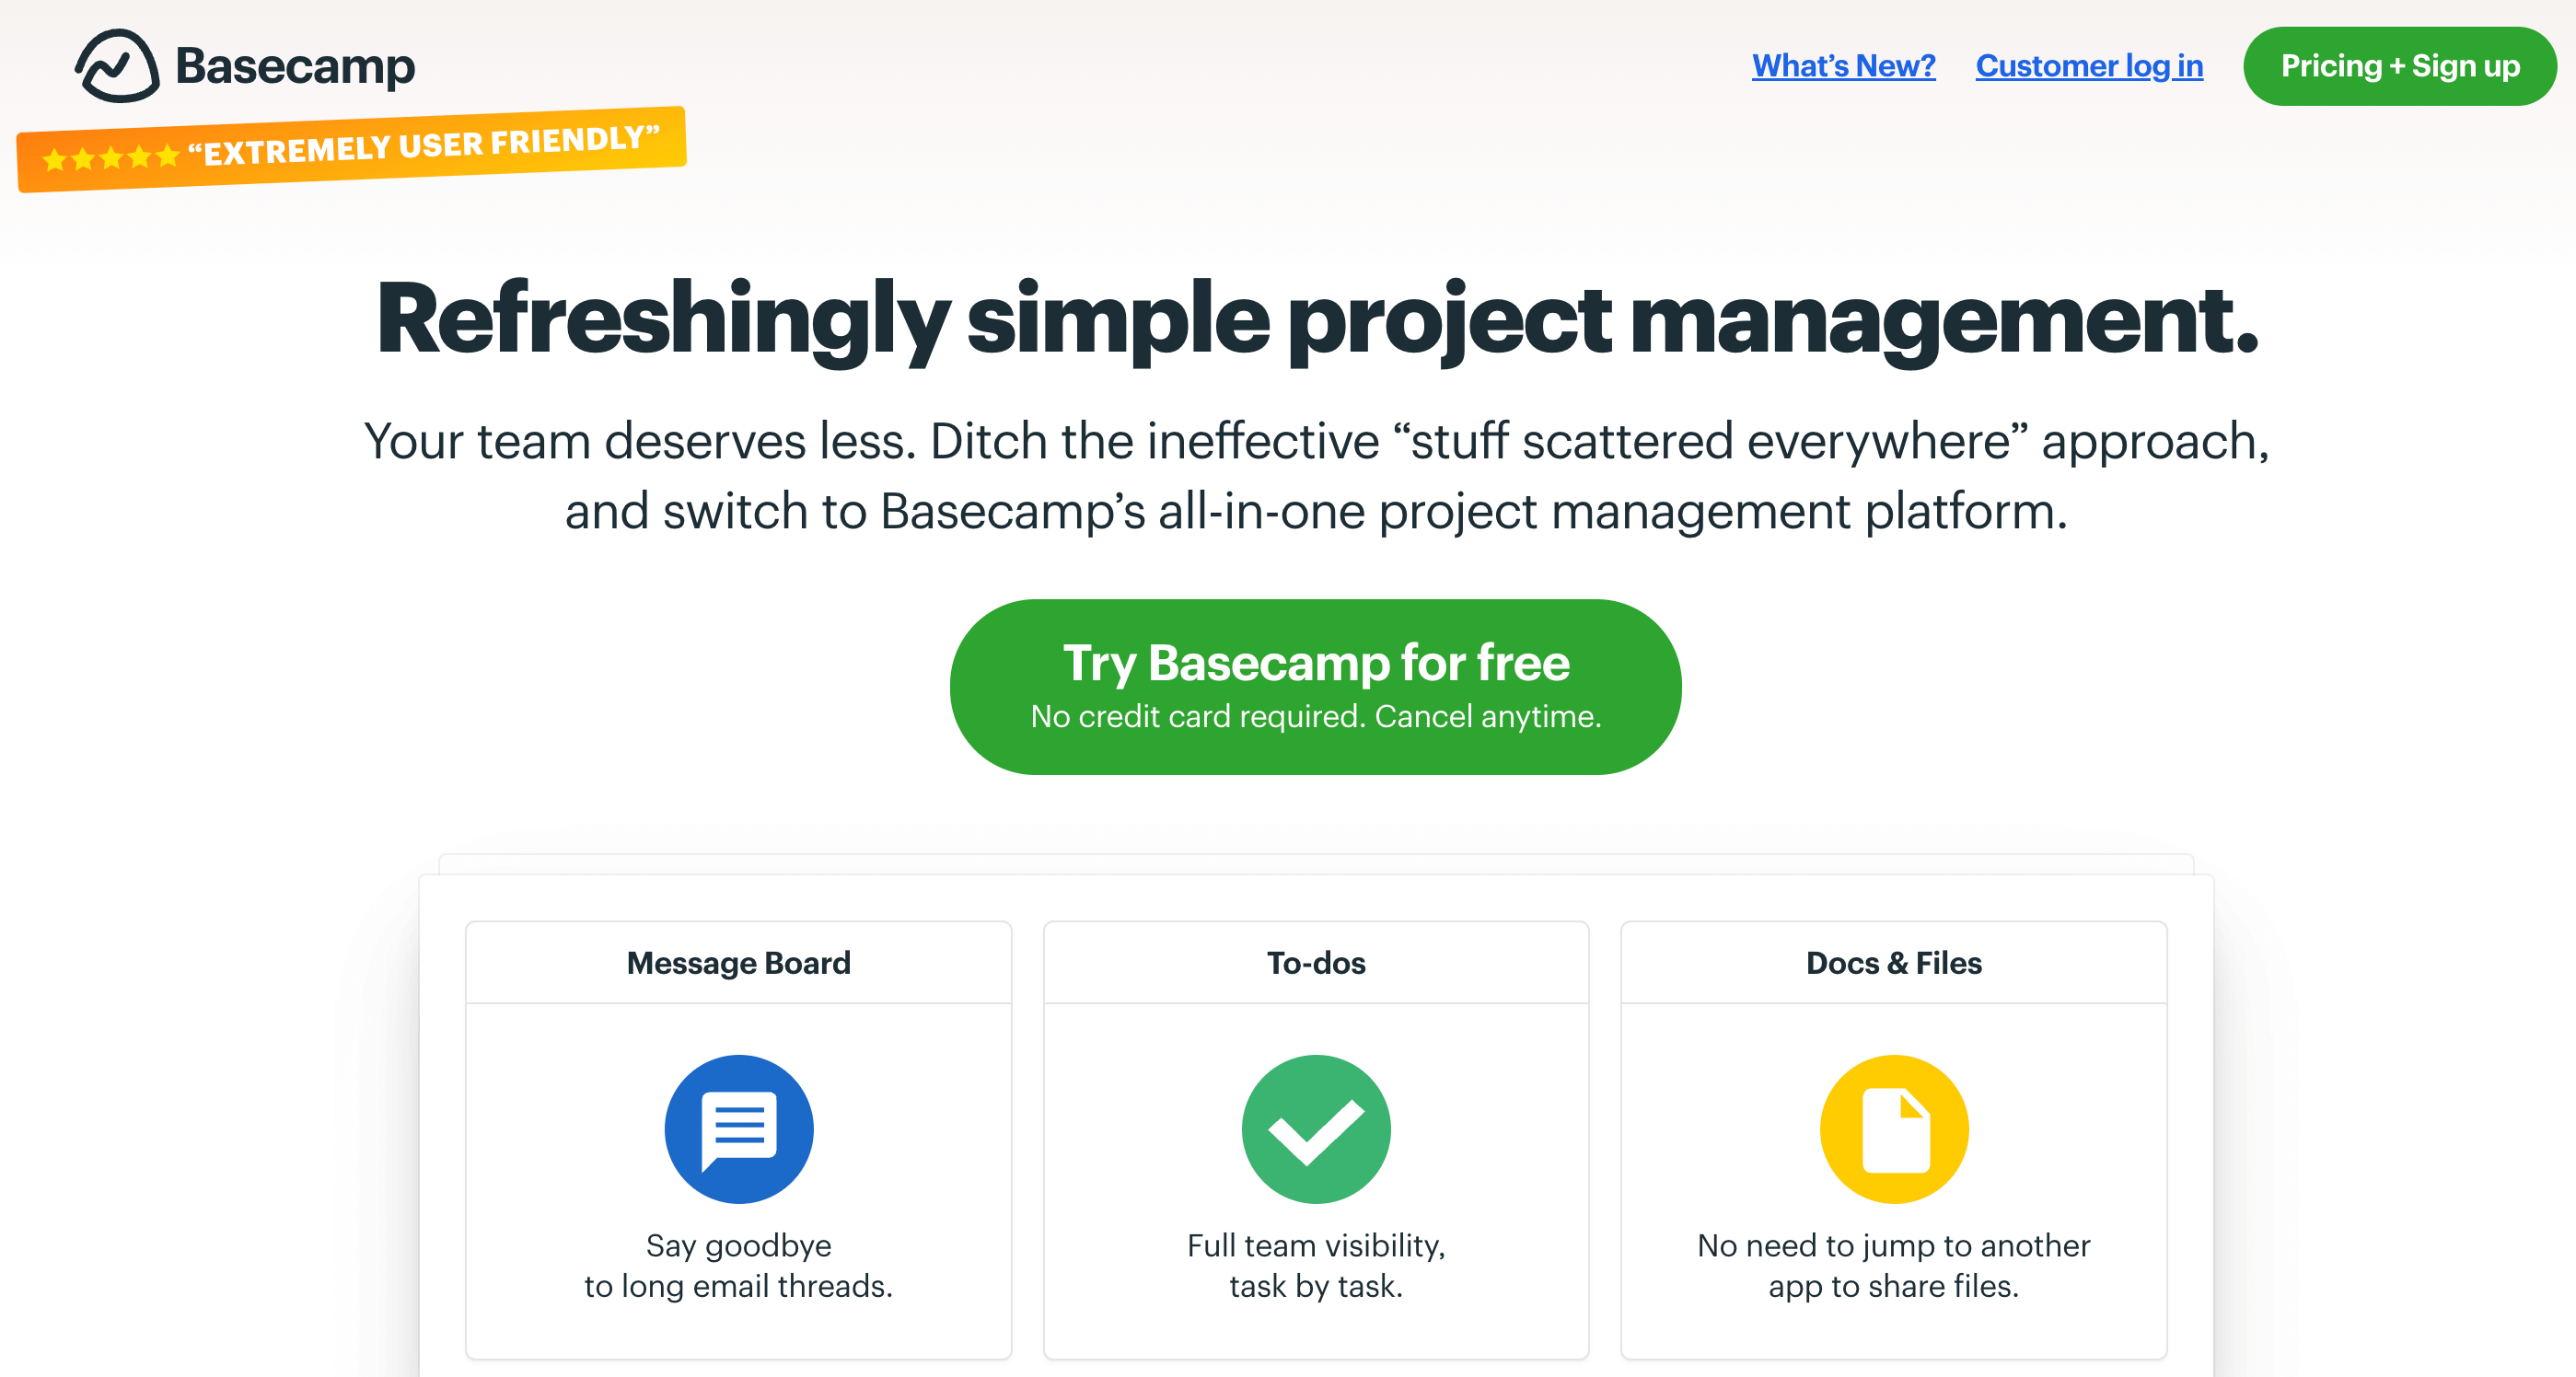 Basecamp homepage presenting it as a refreshingly simple project management platform.